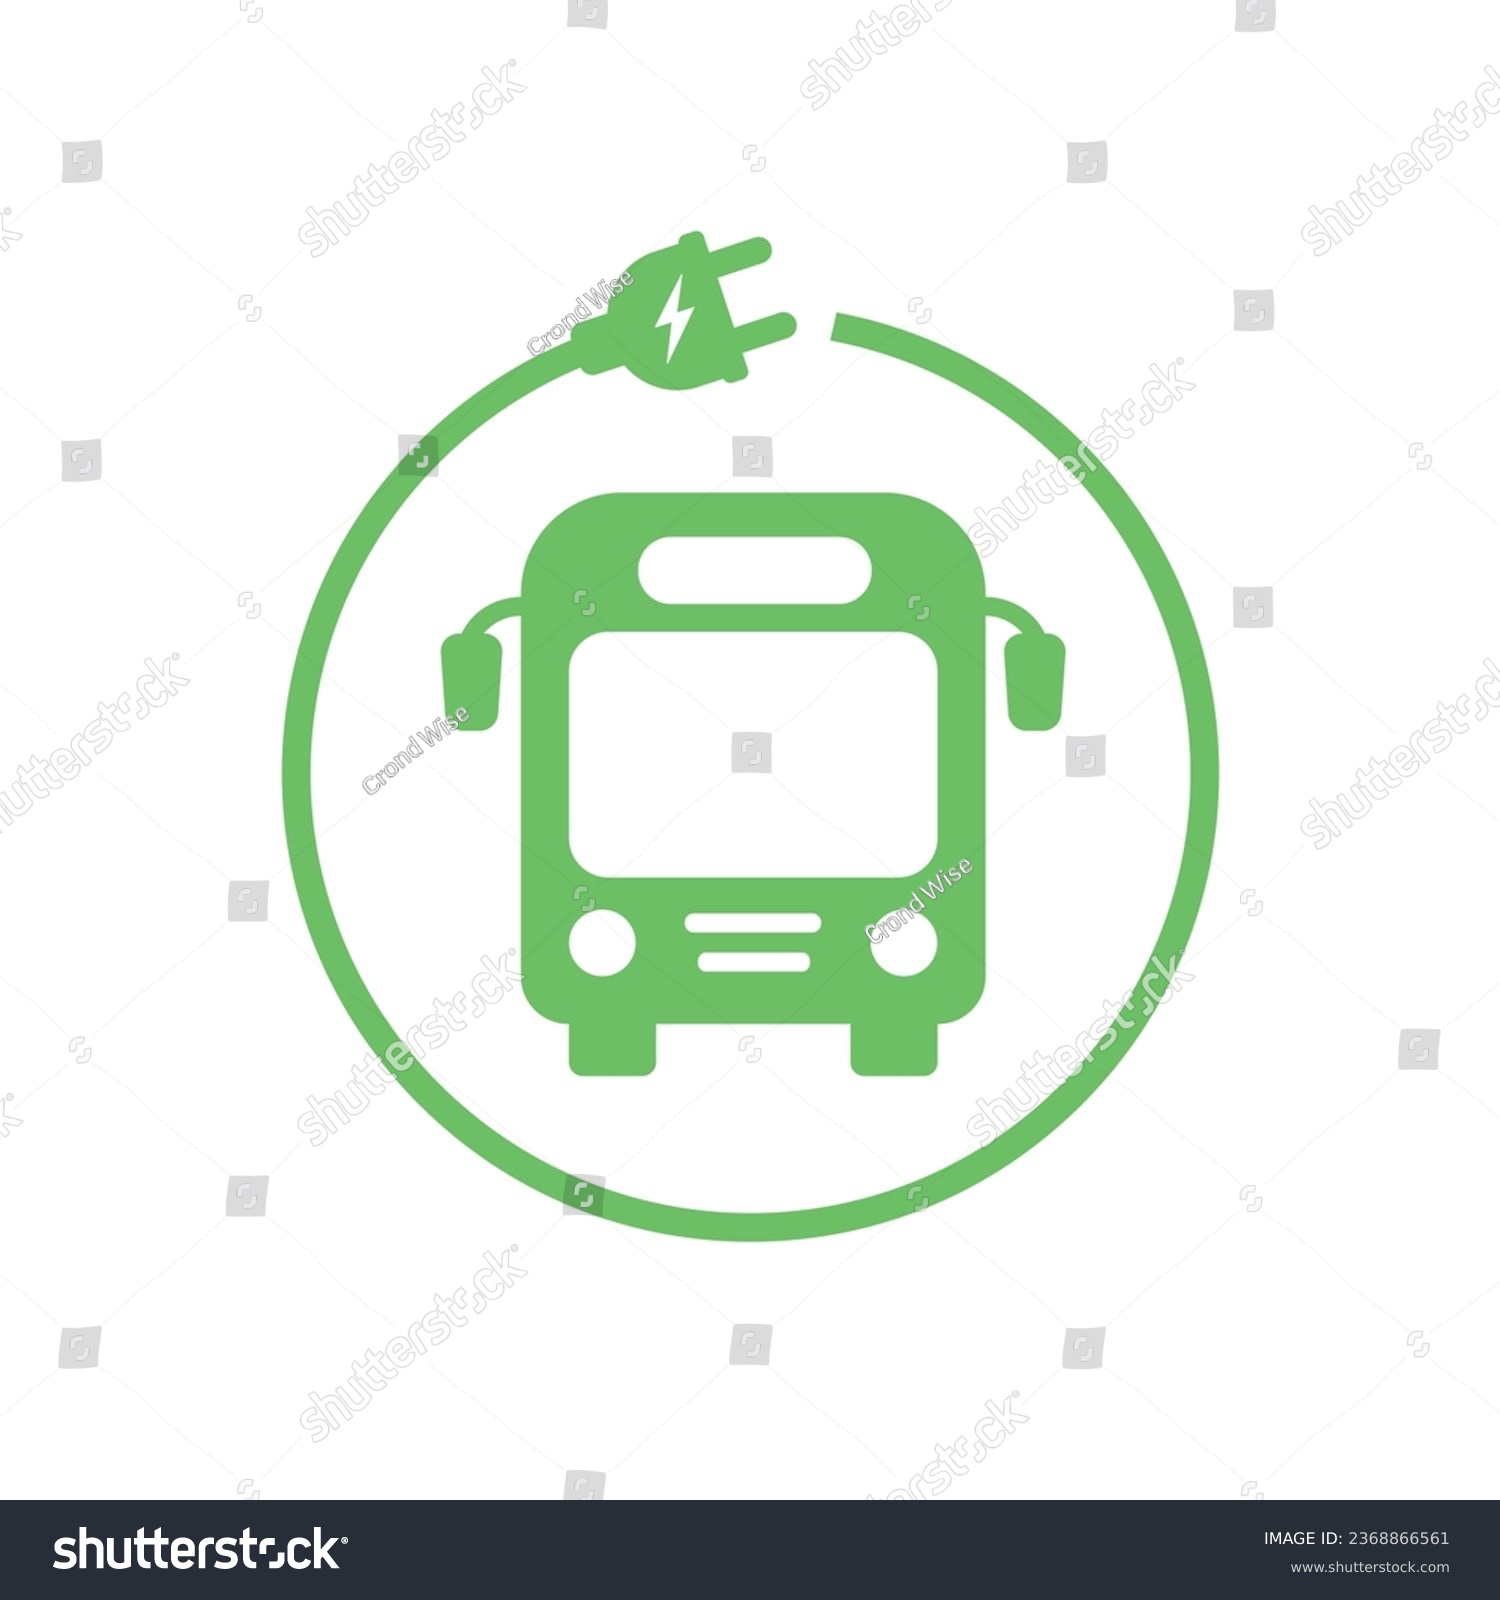 SVG of Electric Bus Charging Icon. Electric Vehicle Sign. Eco Electric Bus With E Plug Green Icon Isolated On White Background. Hybrid Vehicles Charging Point svg